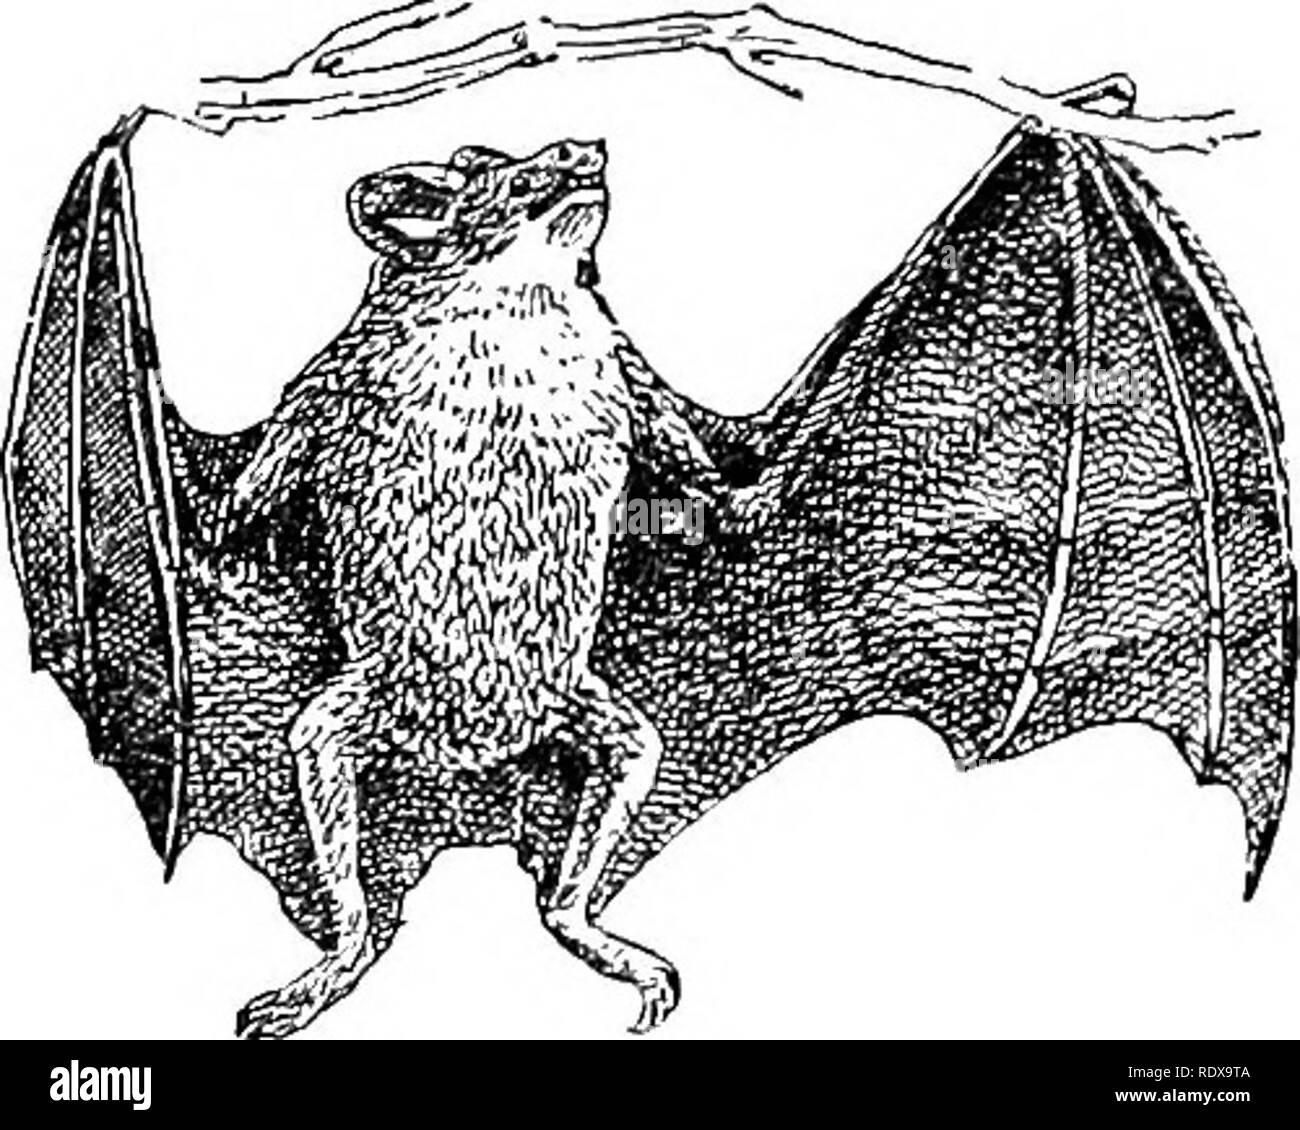 . Natural history. Zoology. THE BATS. 41. Fitj. 21.—Vampibe-Bat (Desmodus riifus). In two small genera of the family (Ghilonycteris and Mormops) the nose- leaf is wanting, and its place supplied by two or more lappets of skin hanging from beneath the skin. One of these ° chin-leafed bats {M. hlainvilhi) is remark- able for its bright orange fur, and like- wise for the extremely fragile structure of the whole head and body. The harm- less vampires (Fampirus) belong to a group of genera in which the tail, when present, perforates the membrane between the legs, while the nose-leaf is spear- shape Stock Photo